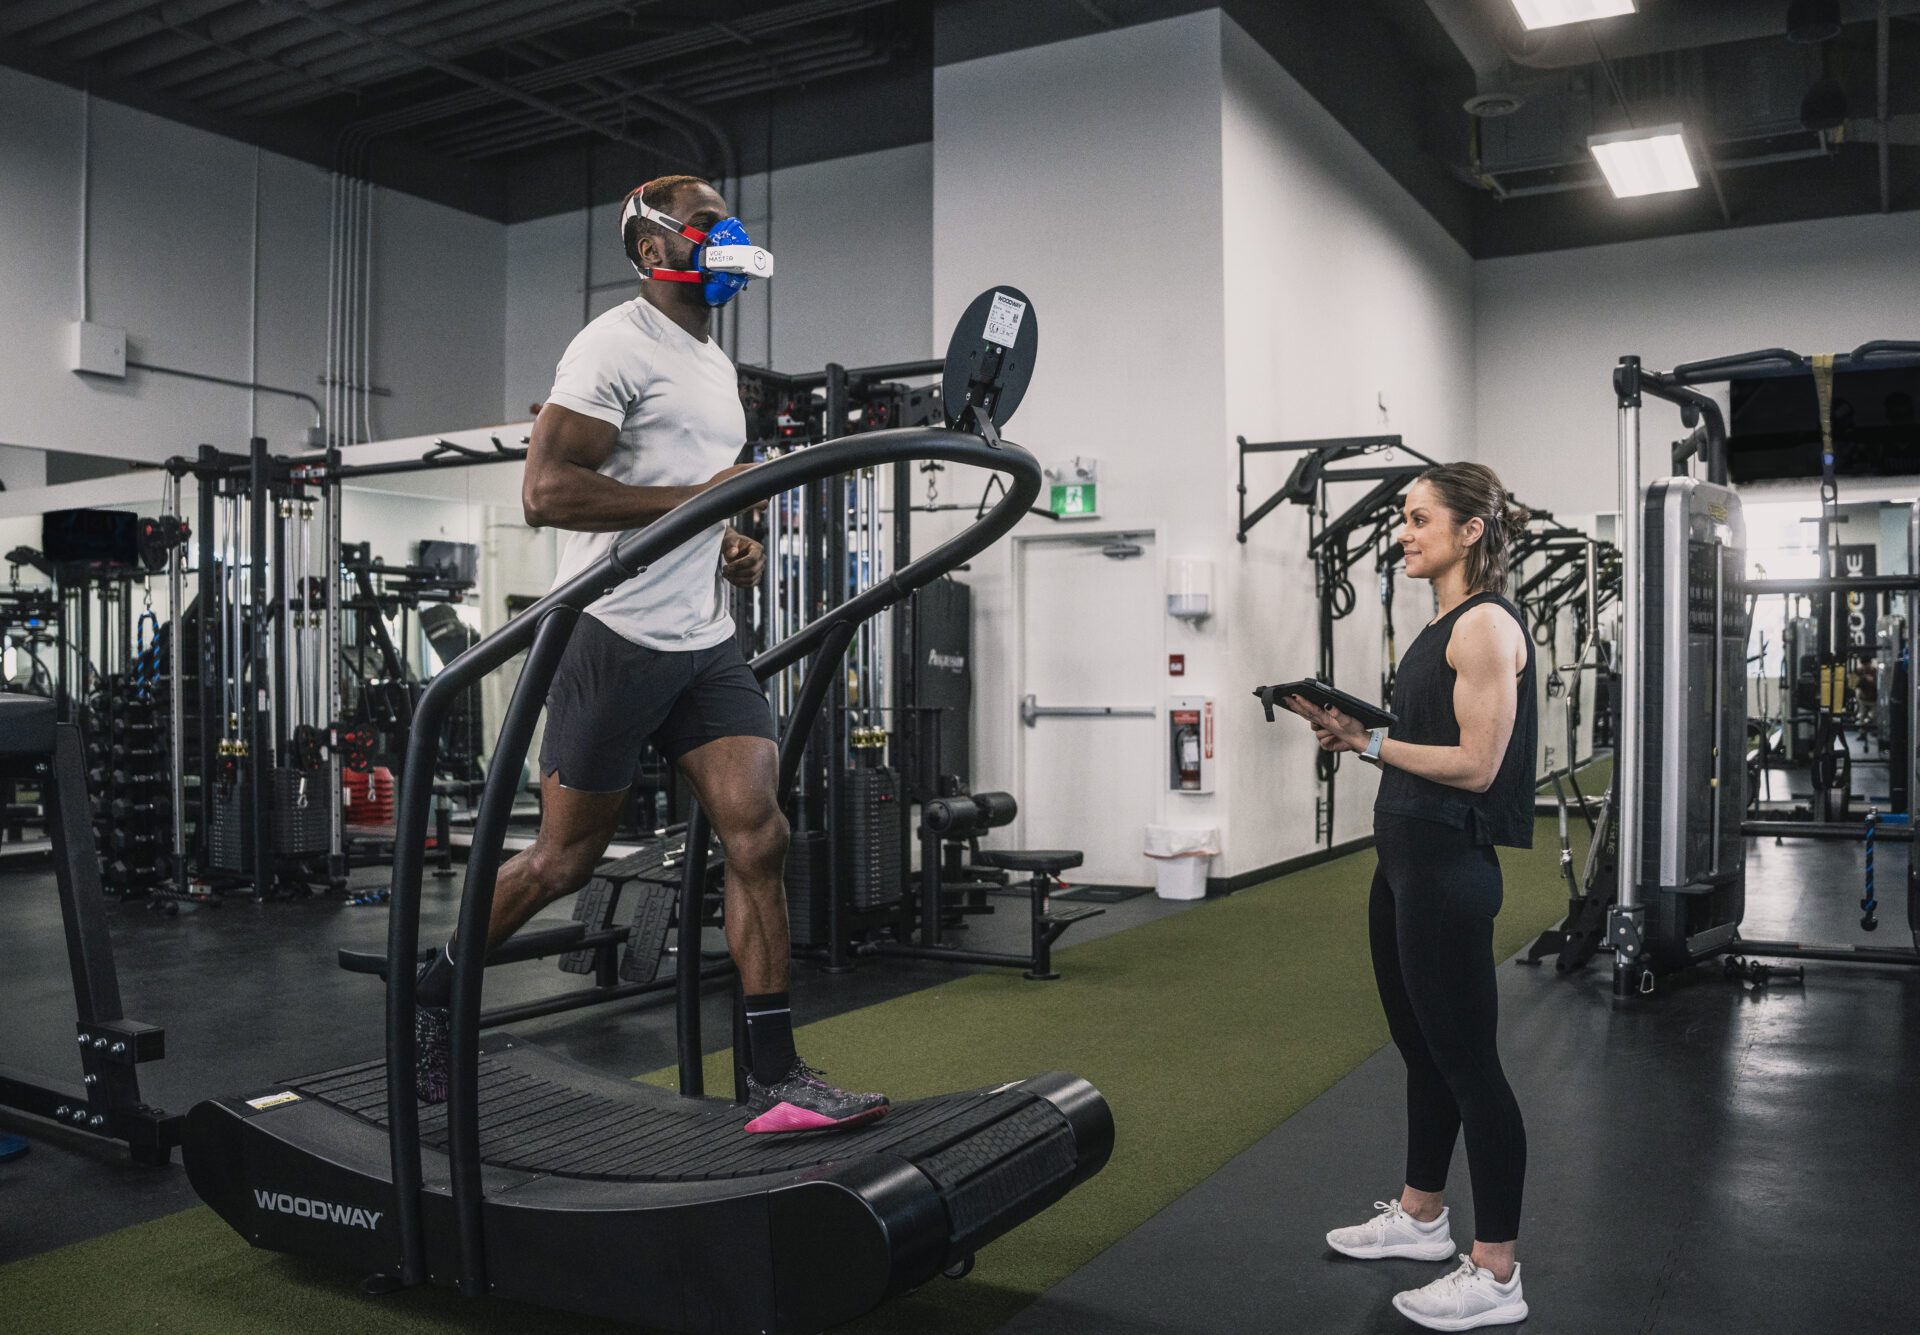 Male athlete runs on the treadmill while a female coach stands nearby holding an ipad to monitor the success of the vo2 master analyzer during various tests and training zones